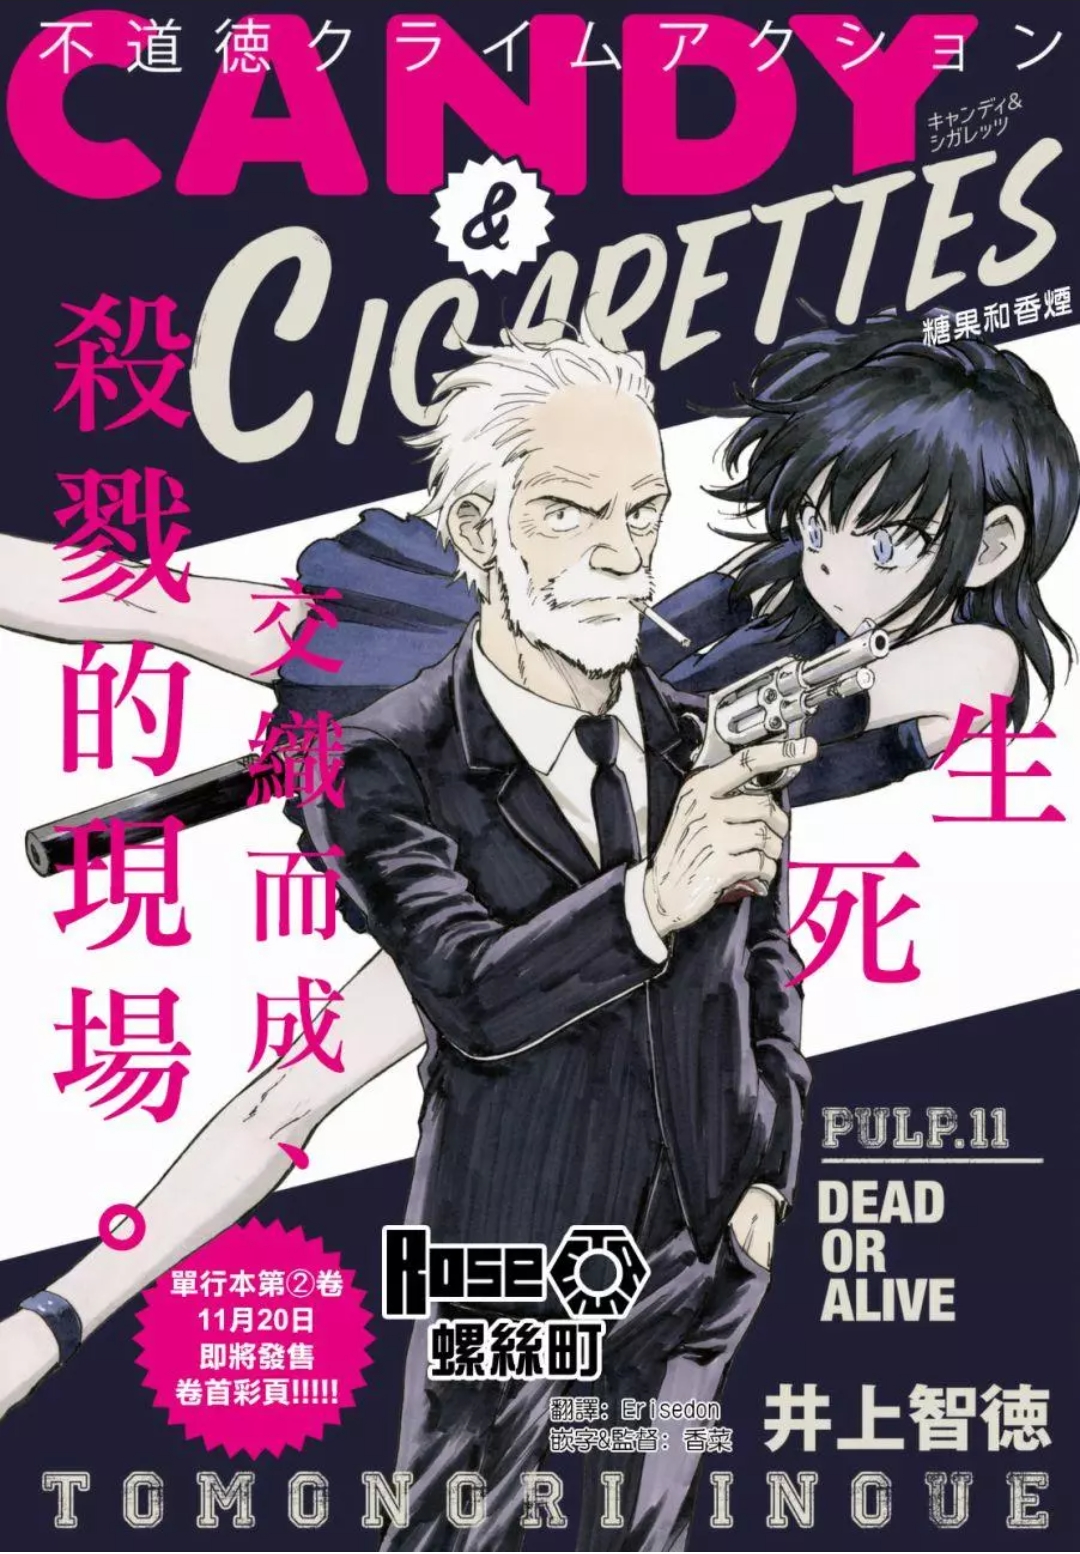 Candy & Cigarettes Vol.3 Chapter 11: Dead Or Alive - Picture 2